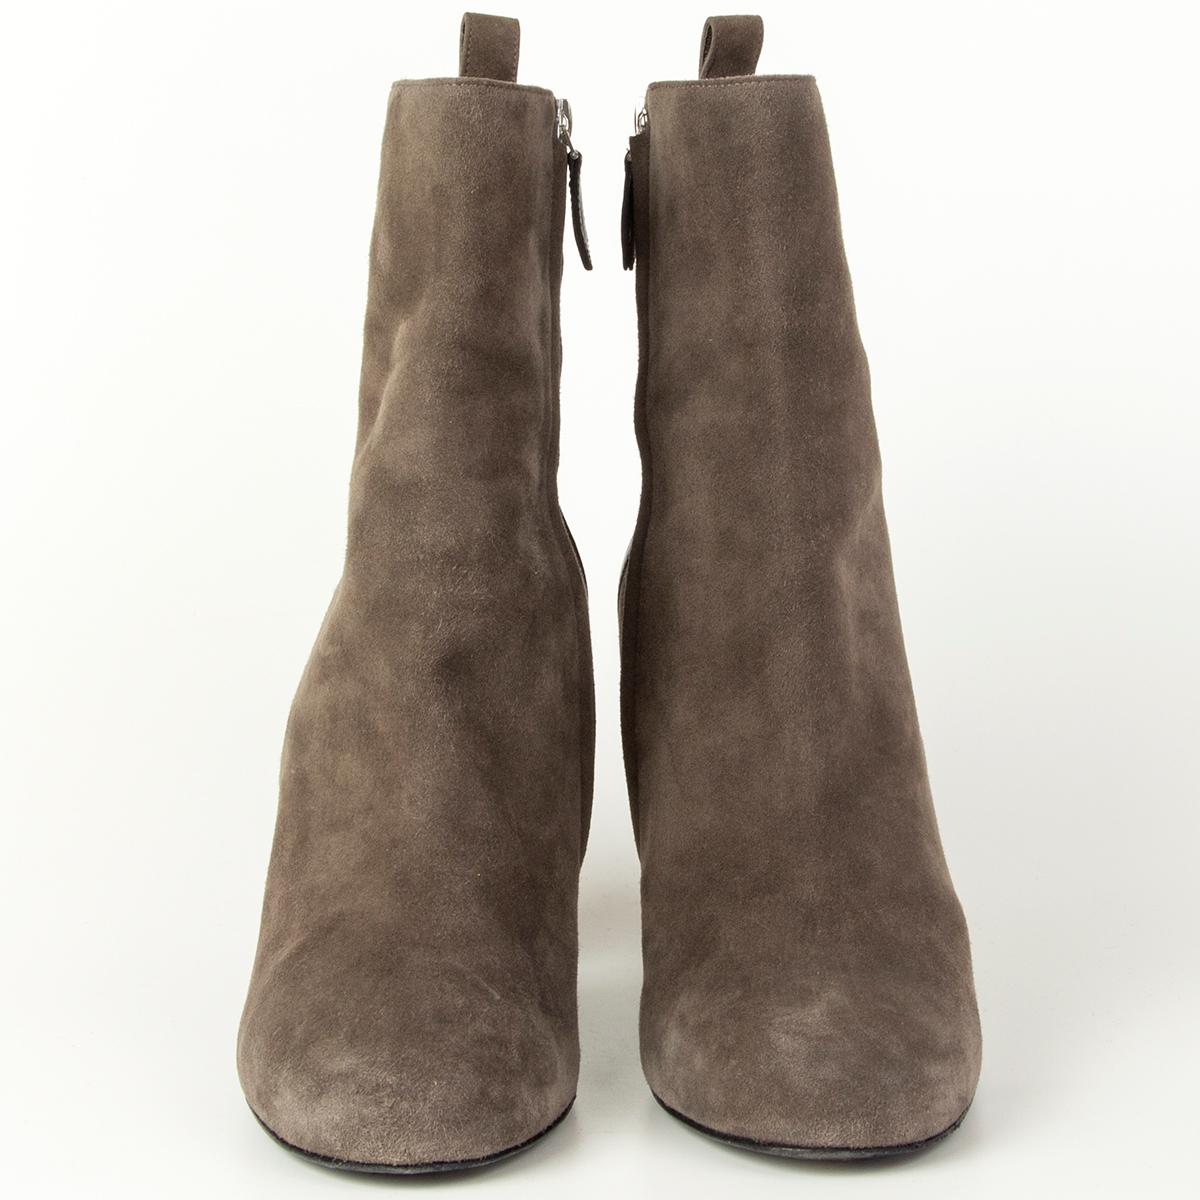 100% authentic Hermès booties in taupe suede and a black calfskin heel. Open with a zipper on the inside. Have been worn and are in excellent condition. 

Measurements
Imprinted Size	41
Shoe Size	41
Inside Sole	26.5cm (10.3in)
Width	8cm